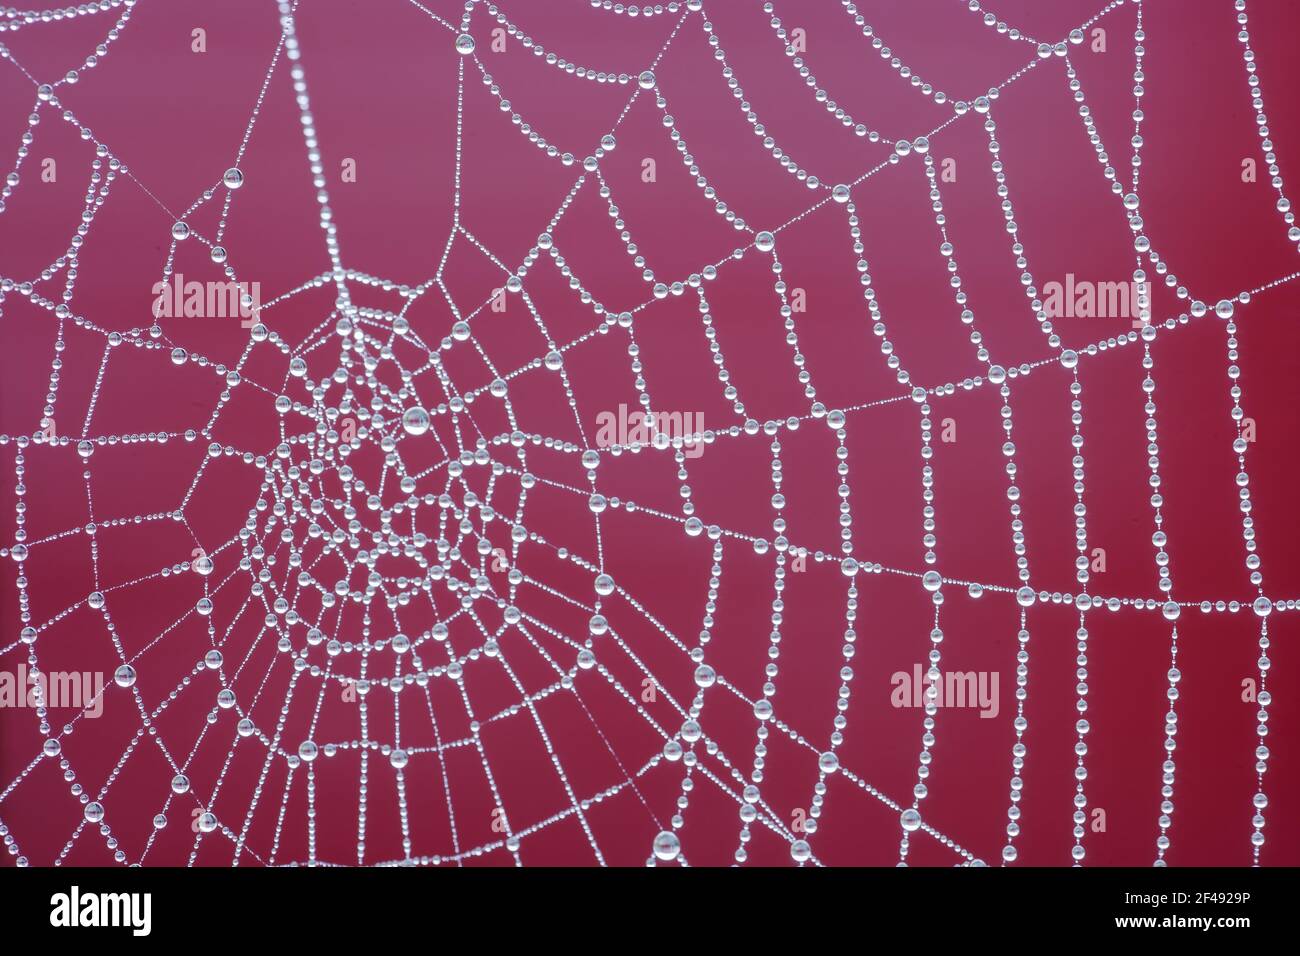 Spiders web with dewEssex, UK IN000858 Stock Photo